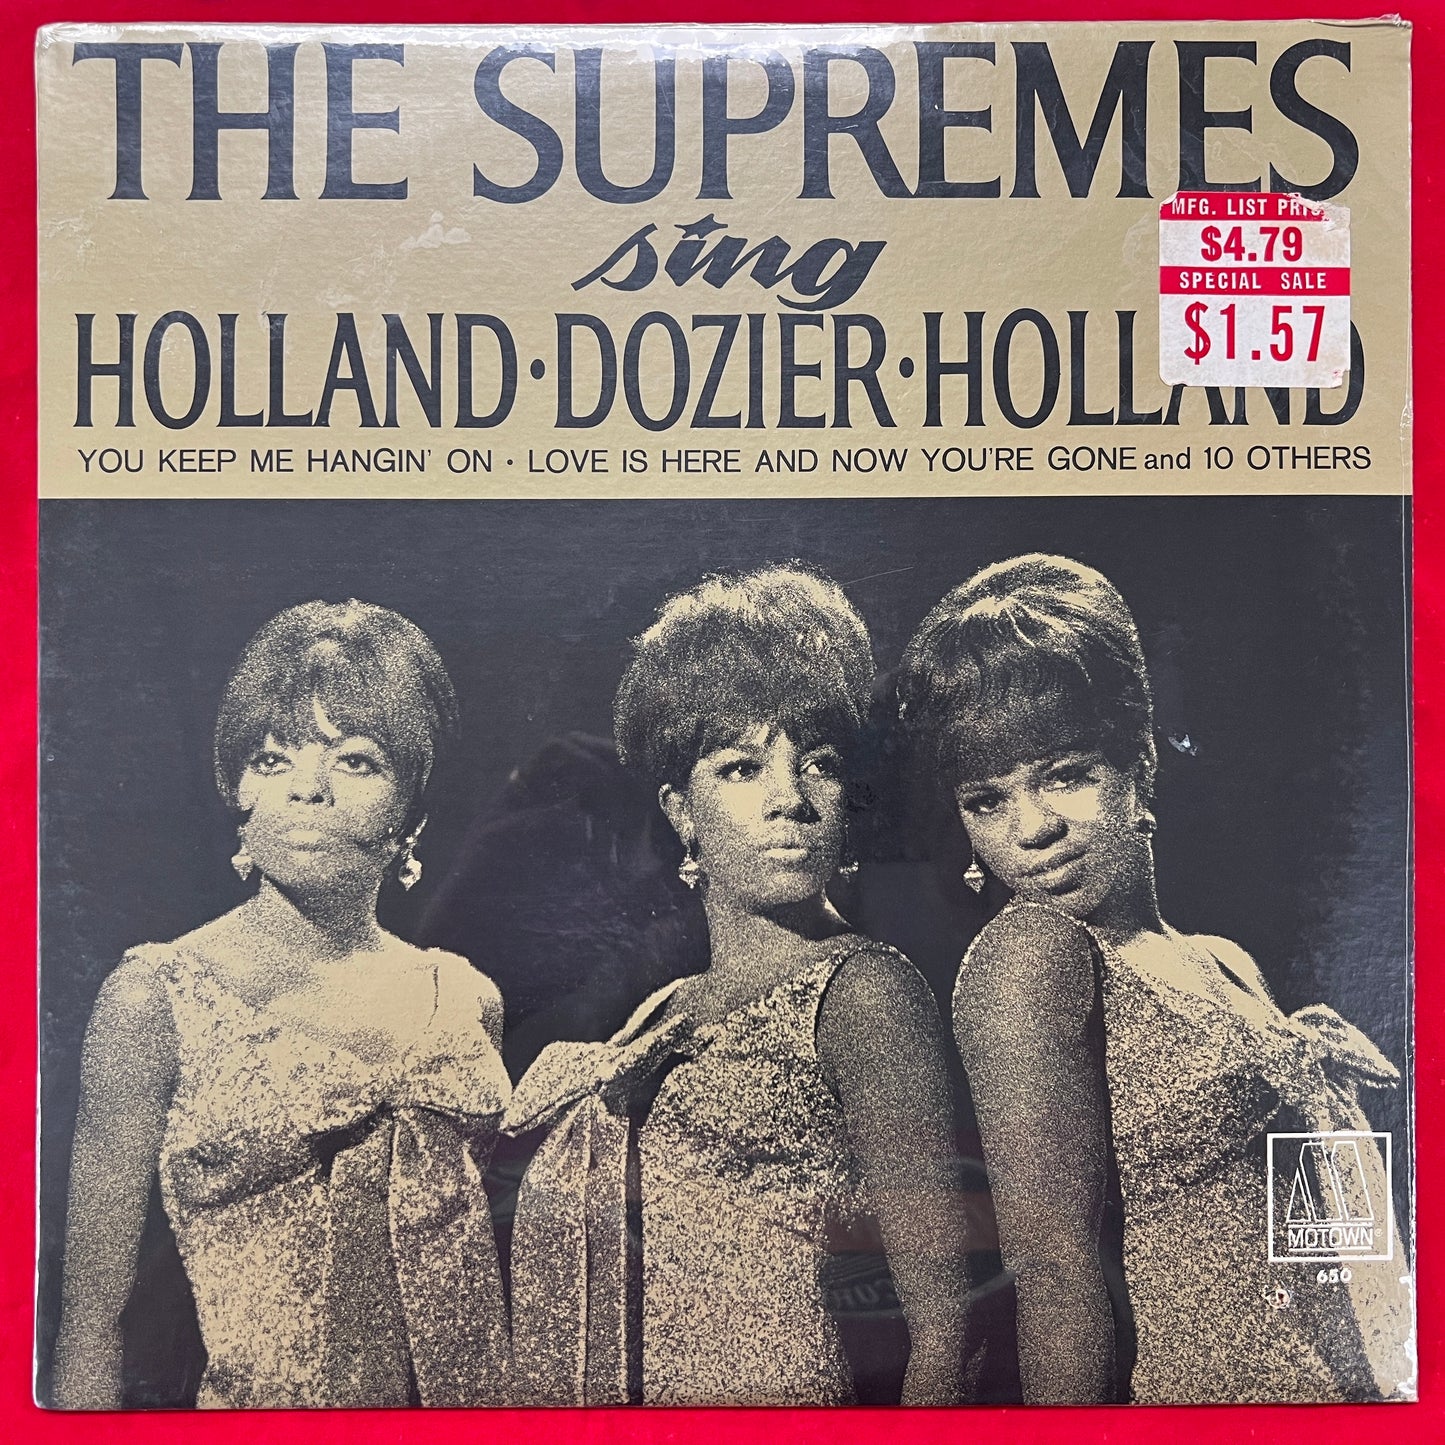 The Supremes – The Supremes Sing Holland-Dozier-Holland – LP